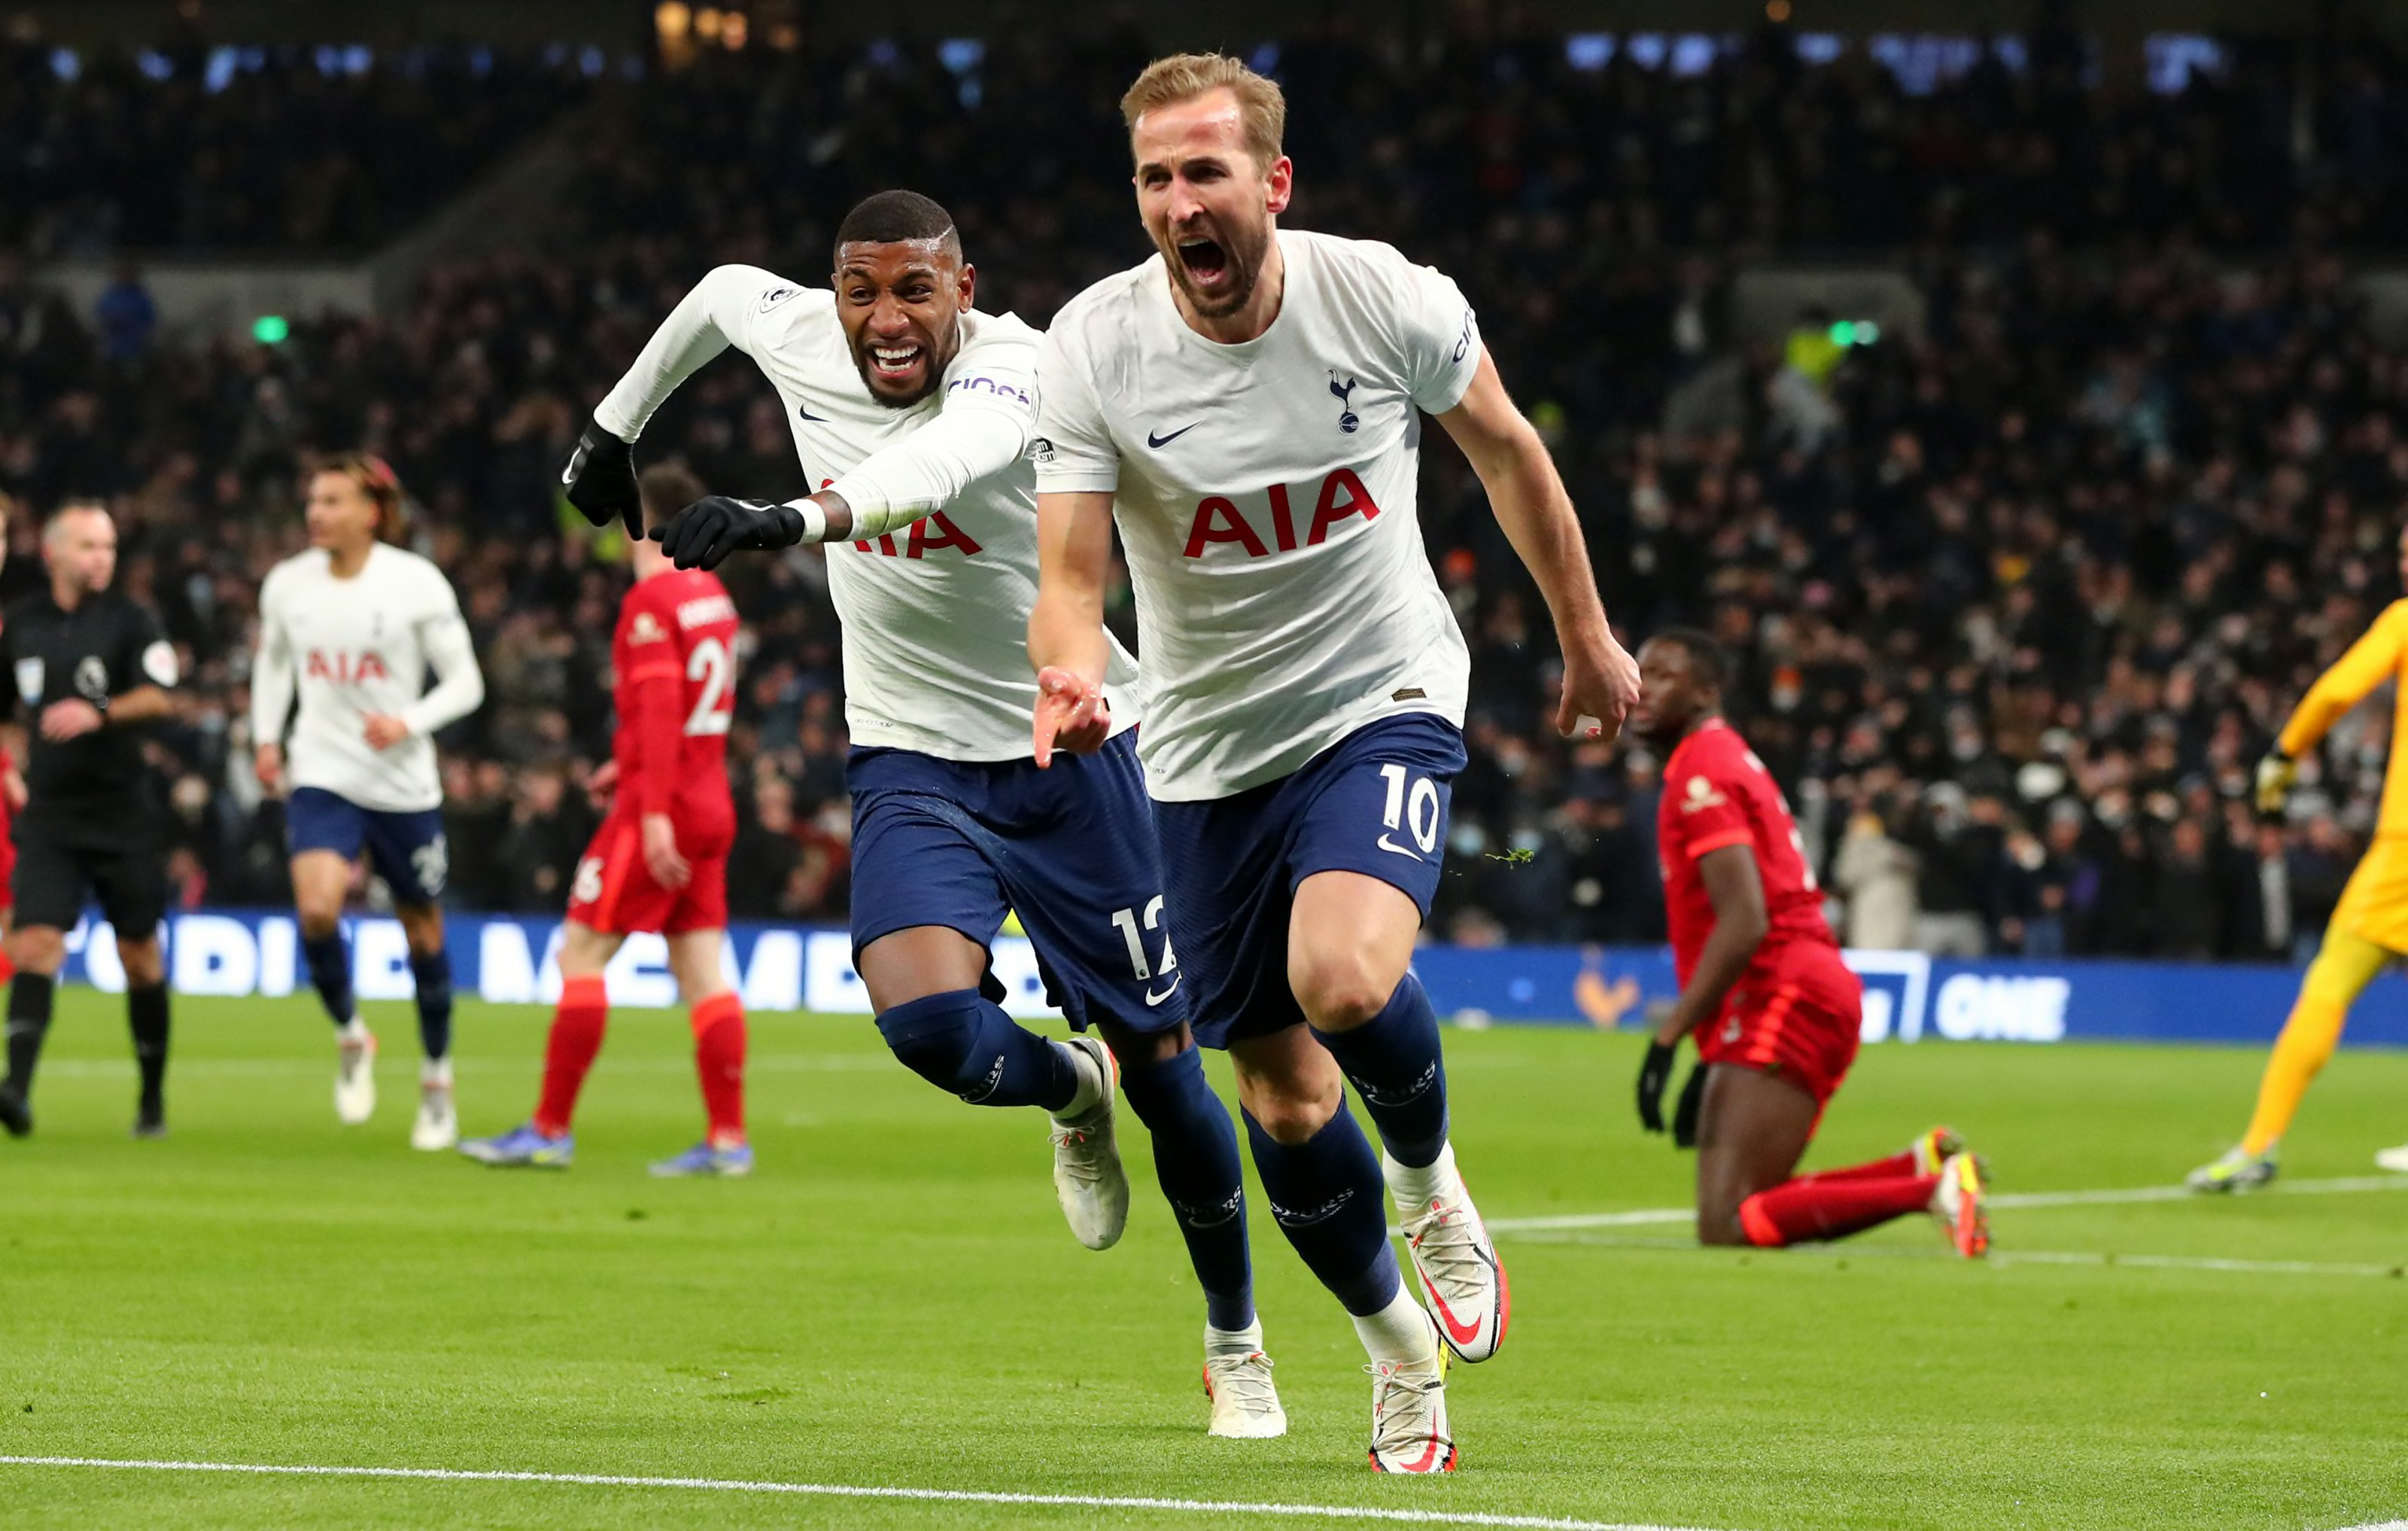 LONDON, ENGLAND - DECEMBER 19: Harry Kane of Tottenham Hotspur celebrates scoring his teams first goal during the Premier League match between Tottenham Hotspur and Liverpool at Tottenham Hotspur Stadium on December 19, 2021 in London, England. (Photo by Chloe Knott - Danehouse/Getty Images)